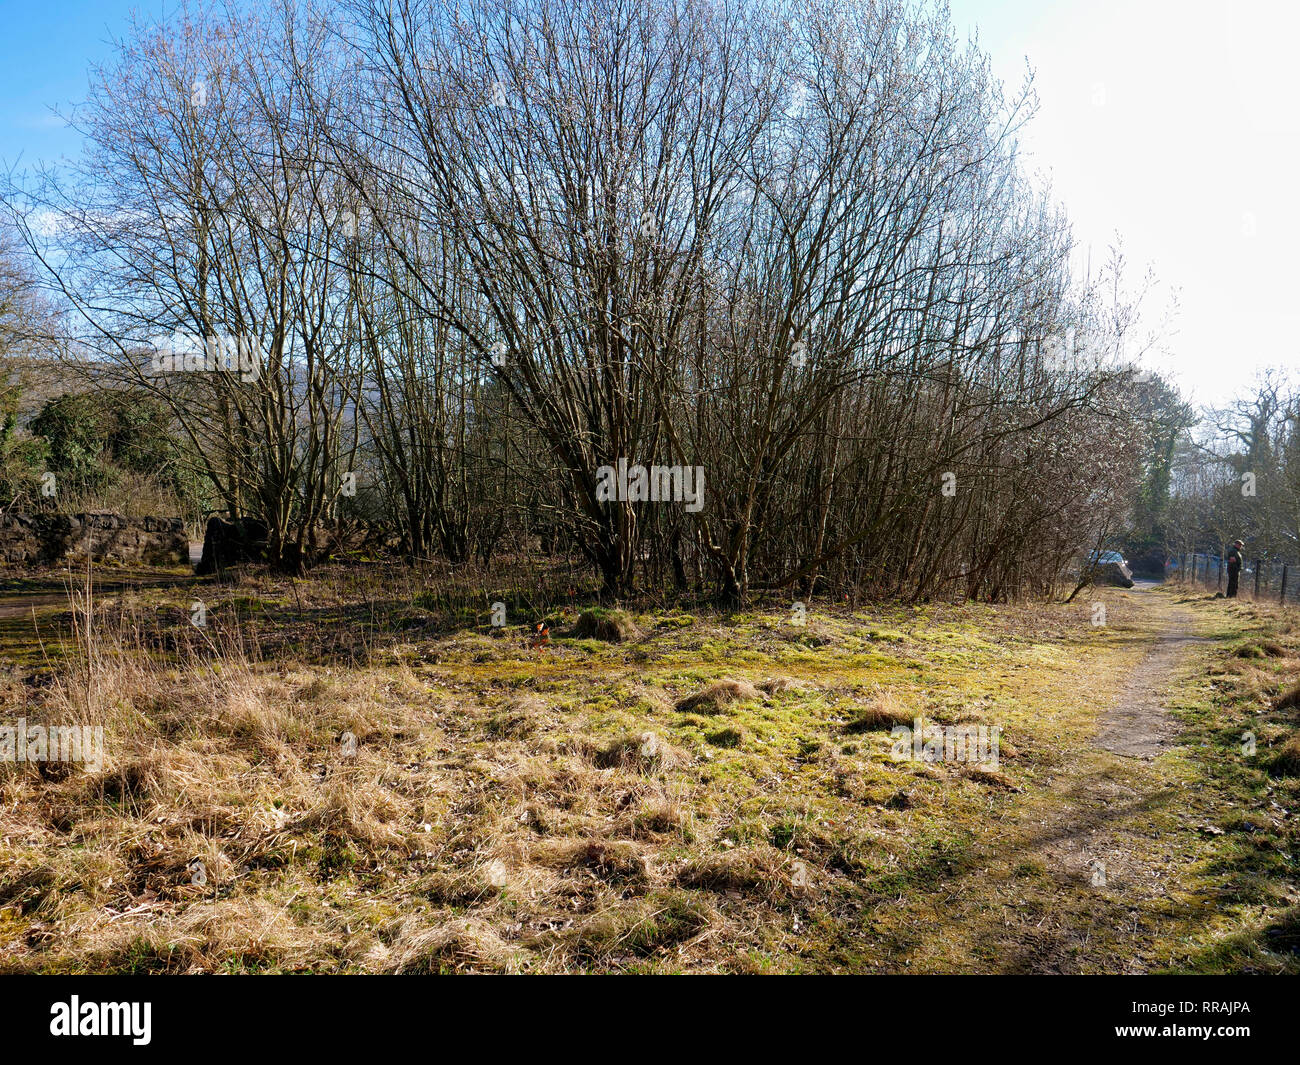 Wirksworth, Derbyshire, UK. 25th Feb, 2019.  Local beauty spot under threat by Gypsy Roma Traveller camp after Councillors from Derbyshire Dales District Council apologised to the residents of Wirksworth for having to make the decision, commenting that they 'wouldn’t wish it on anyone', Councillor Mike Ratcliffe called that decision a 'partisan political manoeuvre', Stoney Wood, Wirksworth, Derbyshire Dales. Land has been allocated as a 6 month temporary tolerated site. DDDC plan to cut down all the trees on the site to make room for the Travellers camp. Credit: Doug Blane/Alamy Live News Stock Photo